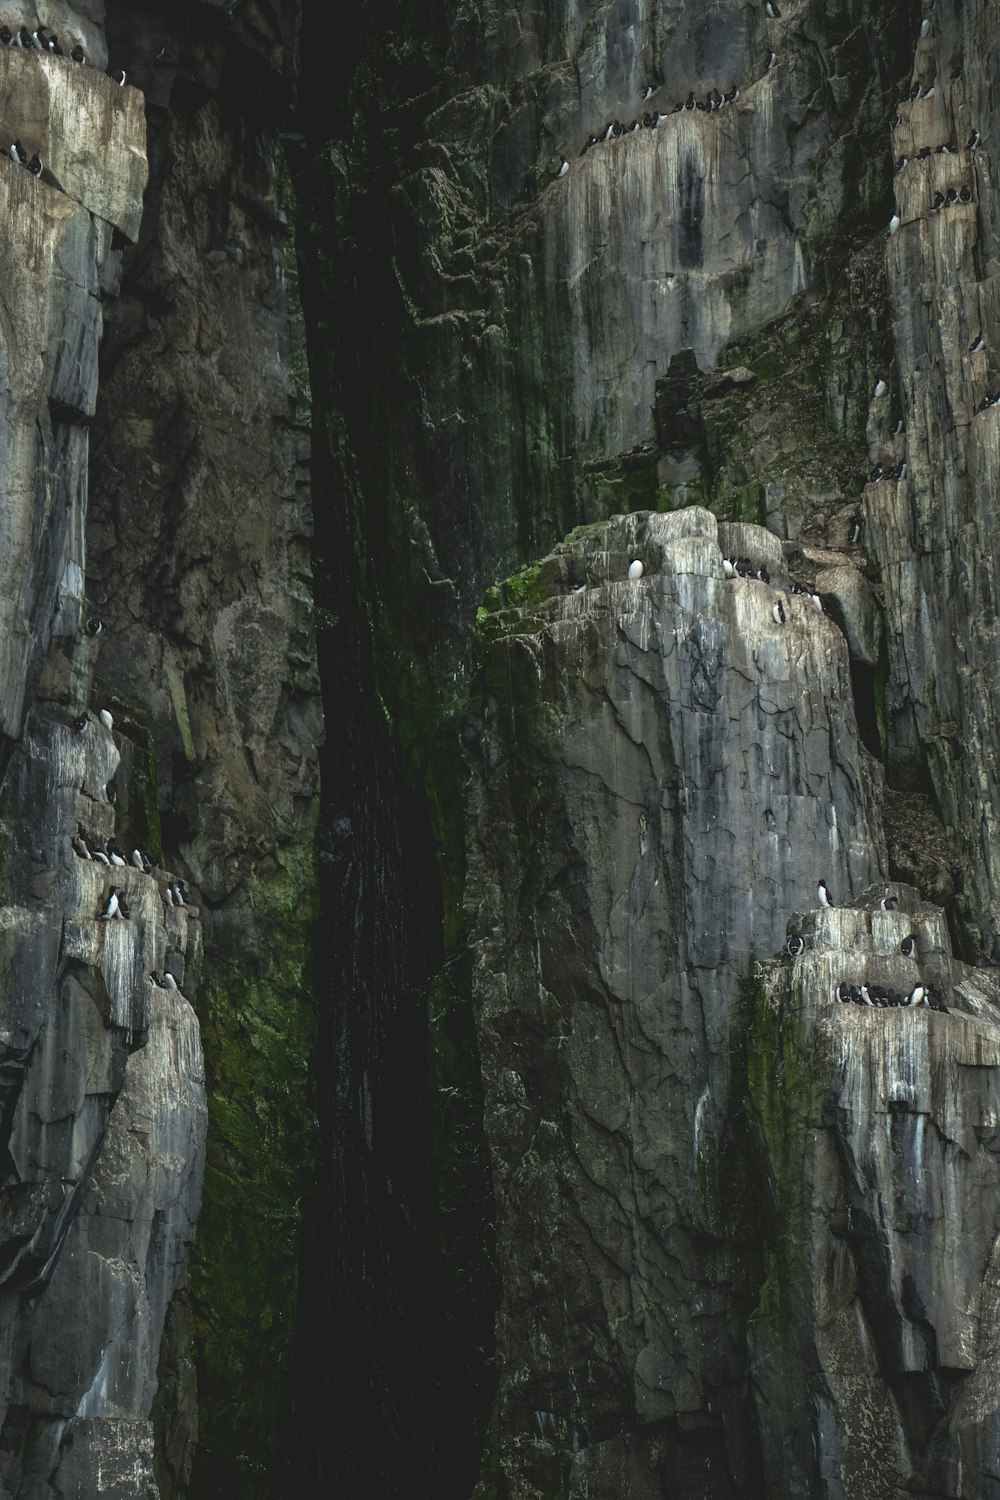 a group of birds perched on the side of a cliff